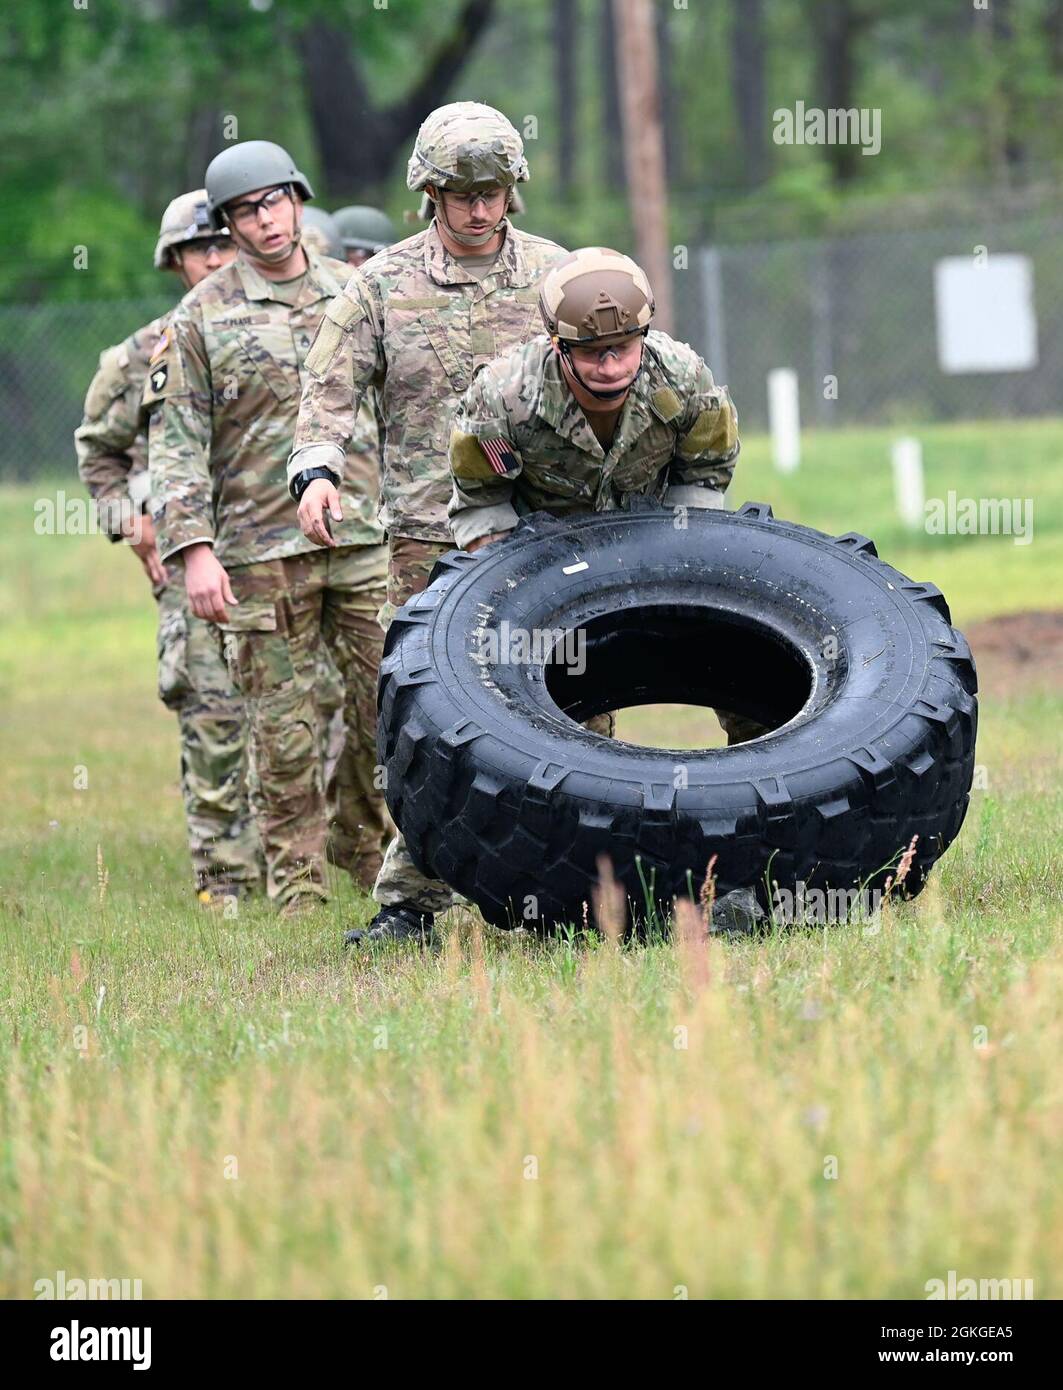 A Soldier from Support Battalion, 1st Special Warfare Training Group (Airborne) flips a truck tire as part of a stress-shoot during the battalion's Commander's Cup competition at Fort Bragg, North Carolina April 15, 2021. The Soldiers from each company competed in a ruck march, obstacle course, land navigation, Jeopardy-themed trivia contest and stress shoot with pistols and rifles. Stock Photo